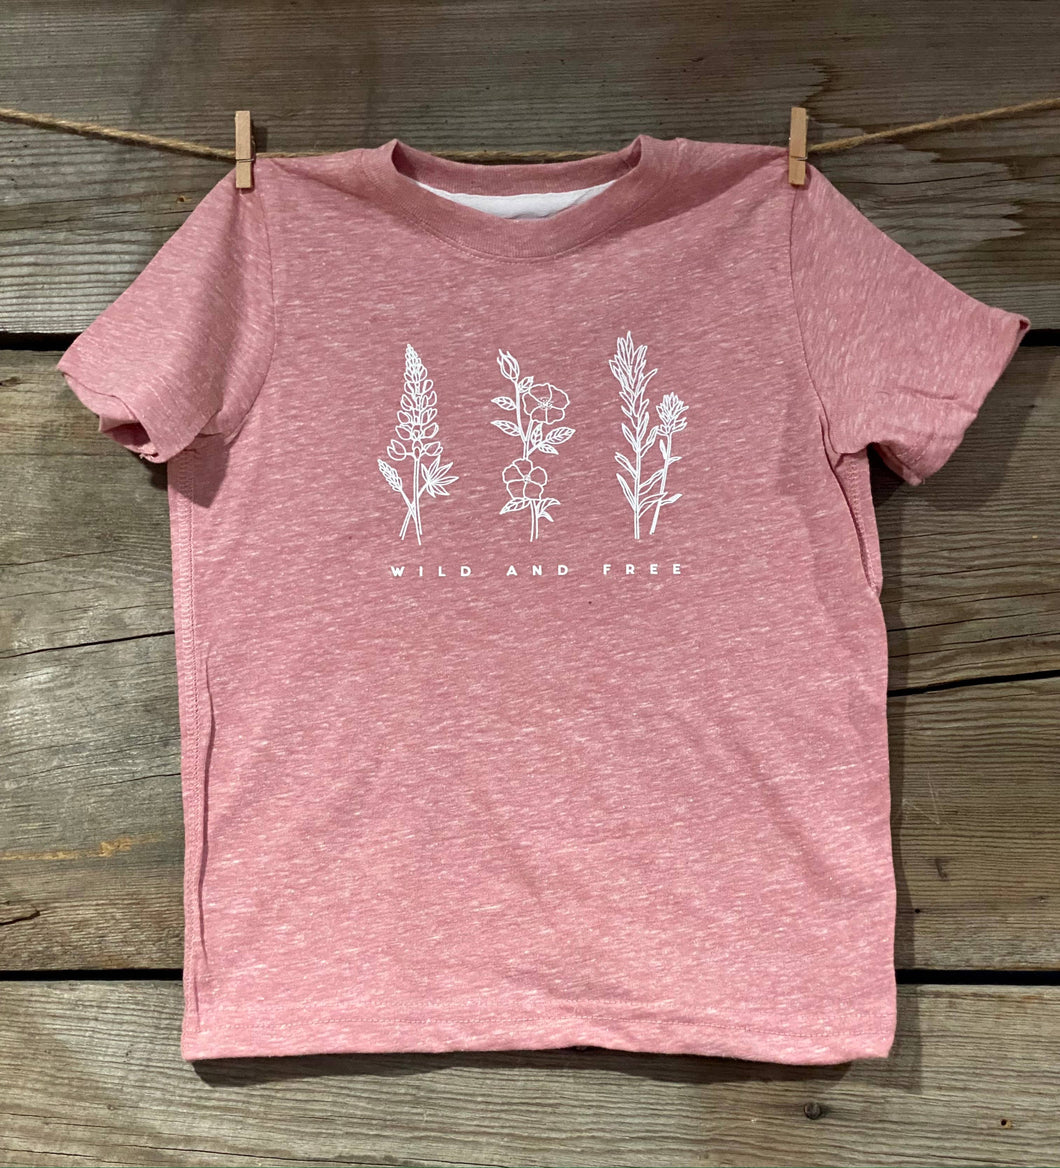 Wild and Free Kids Tee: 4T / Pink